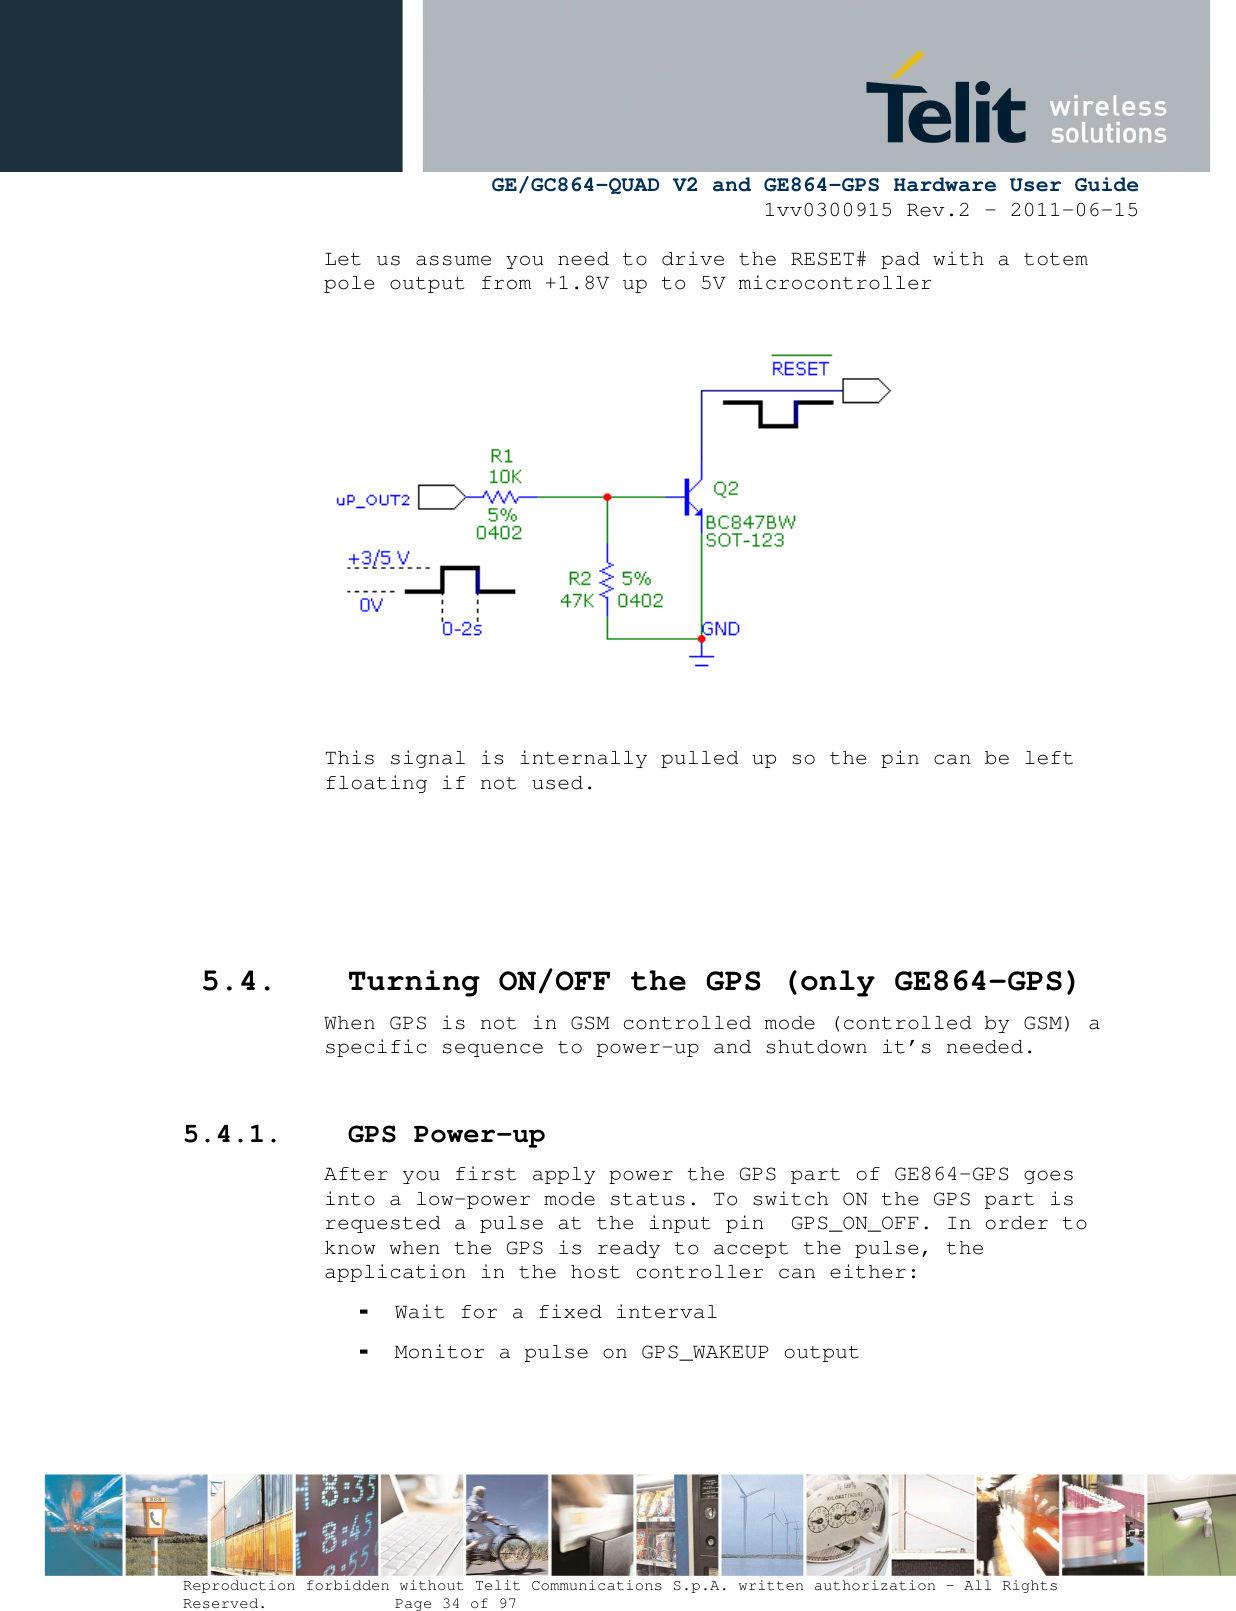      GE/GC864-QUAD V2 and GE864-GPS Hardware User Guide 1vv0300915 Rev.2 – 2011-06-15  Reproduction forbidden without Telit Communications S.p.A. written authorization - All Rights Reserved.    Page 34 of 97  Let us assume you need to drive the RESET# pad with a totem pole output from +1.8V up to 5V microcontroller    This signal is internally pulled up so the pin can be left floating if not used.     5.4. Turning ON/OFF the GPS (only GE864-GPS) When GPS is not in GSM controlled mode (controlled by GSM) a specific sequence to power-up and shutdown it’s needed.  5.4.1. GPS Power-up After you first apply power the GPS part of GE864-GPS goes into a low-power mode status. To switch ON the GPS part is requested a pulse at the input pin  GPS_ON_OFF. In order to know when the GPS is ready to accept the pulse, the application in the host controller can either: - Wait for a fixed interval - Monitor a pulse on GPS_WAKEUP output 